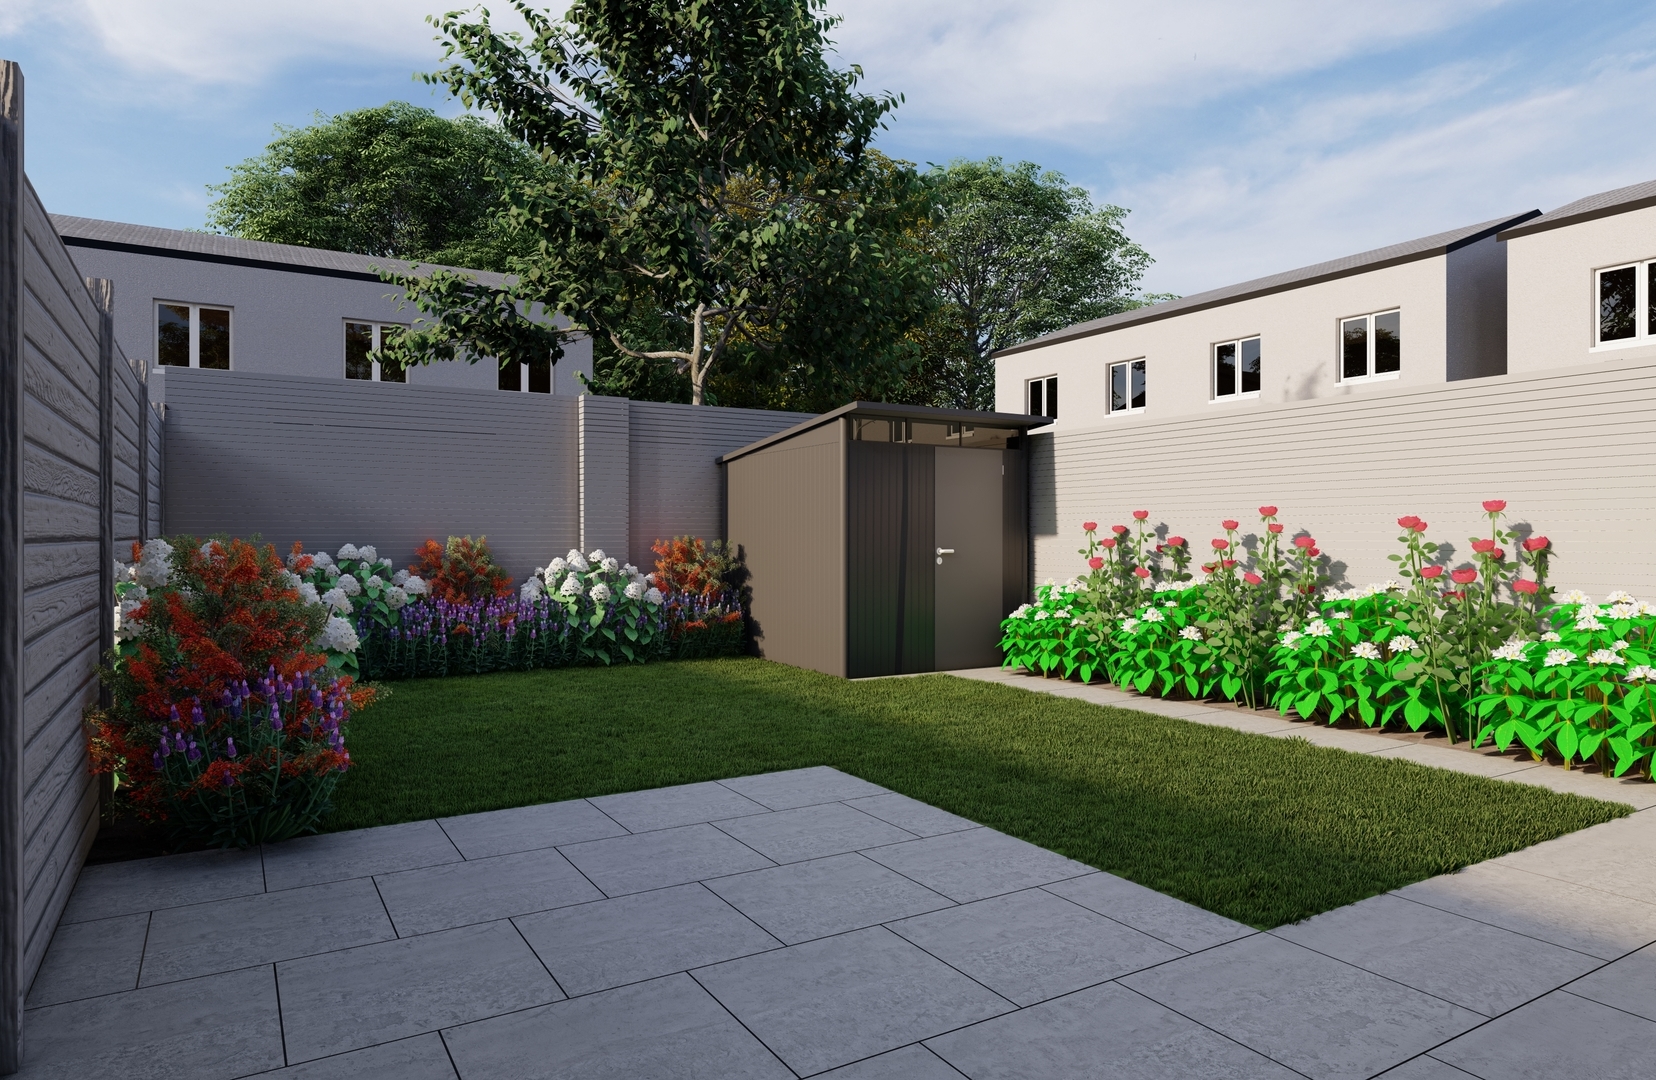 Design Visuals for a Family Garden in Lucan featuring natural grass lawn, limestone paving, Biohort Garden Shed and mixed low maintenance  planting.